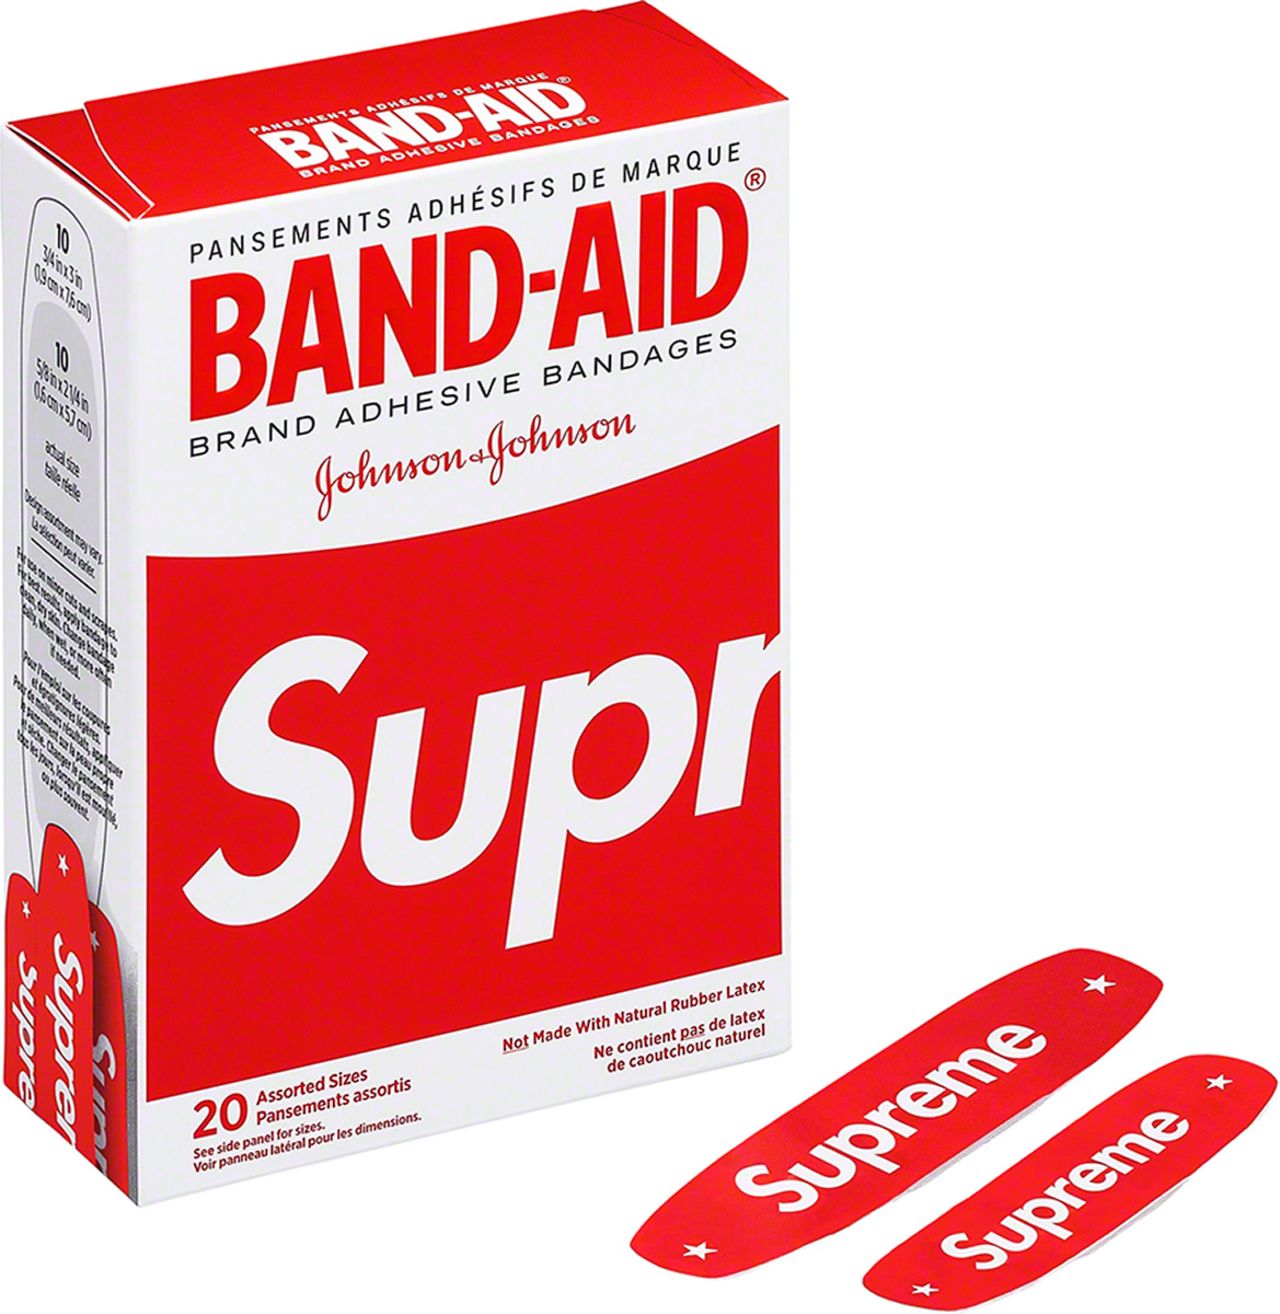 The Spring-Summer 19 collection from Supreme New York includes many off-kilter collector's items, such as Band-Aids.